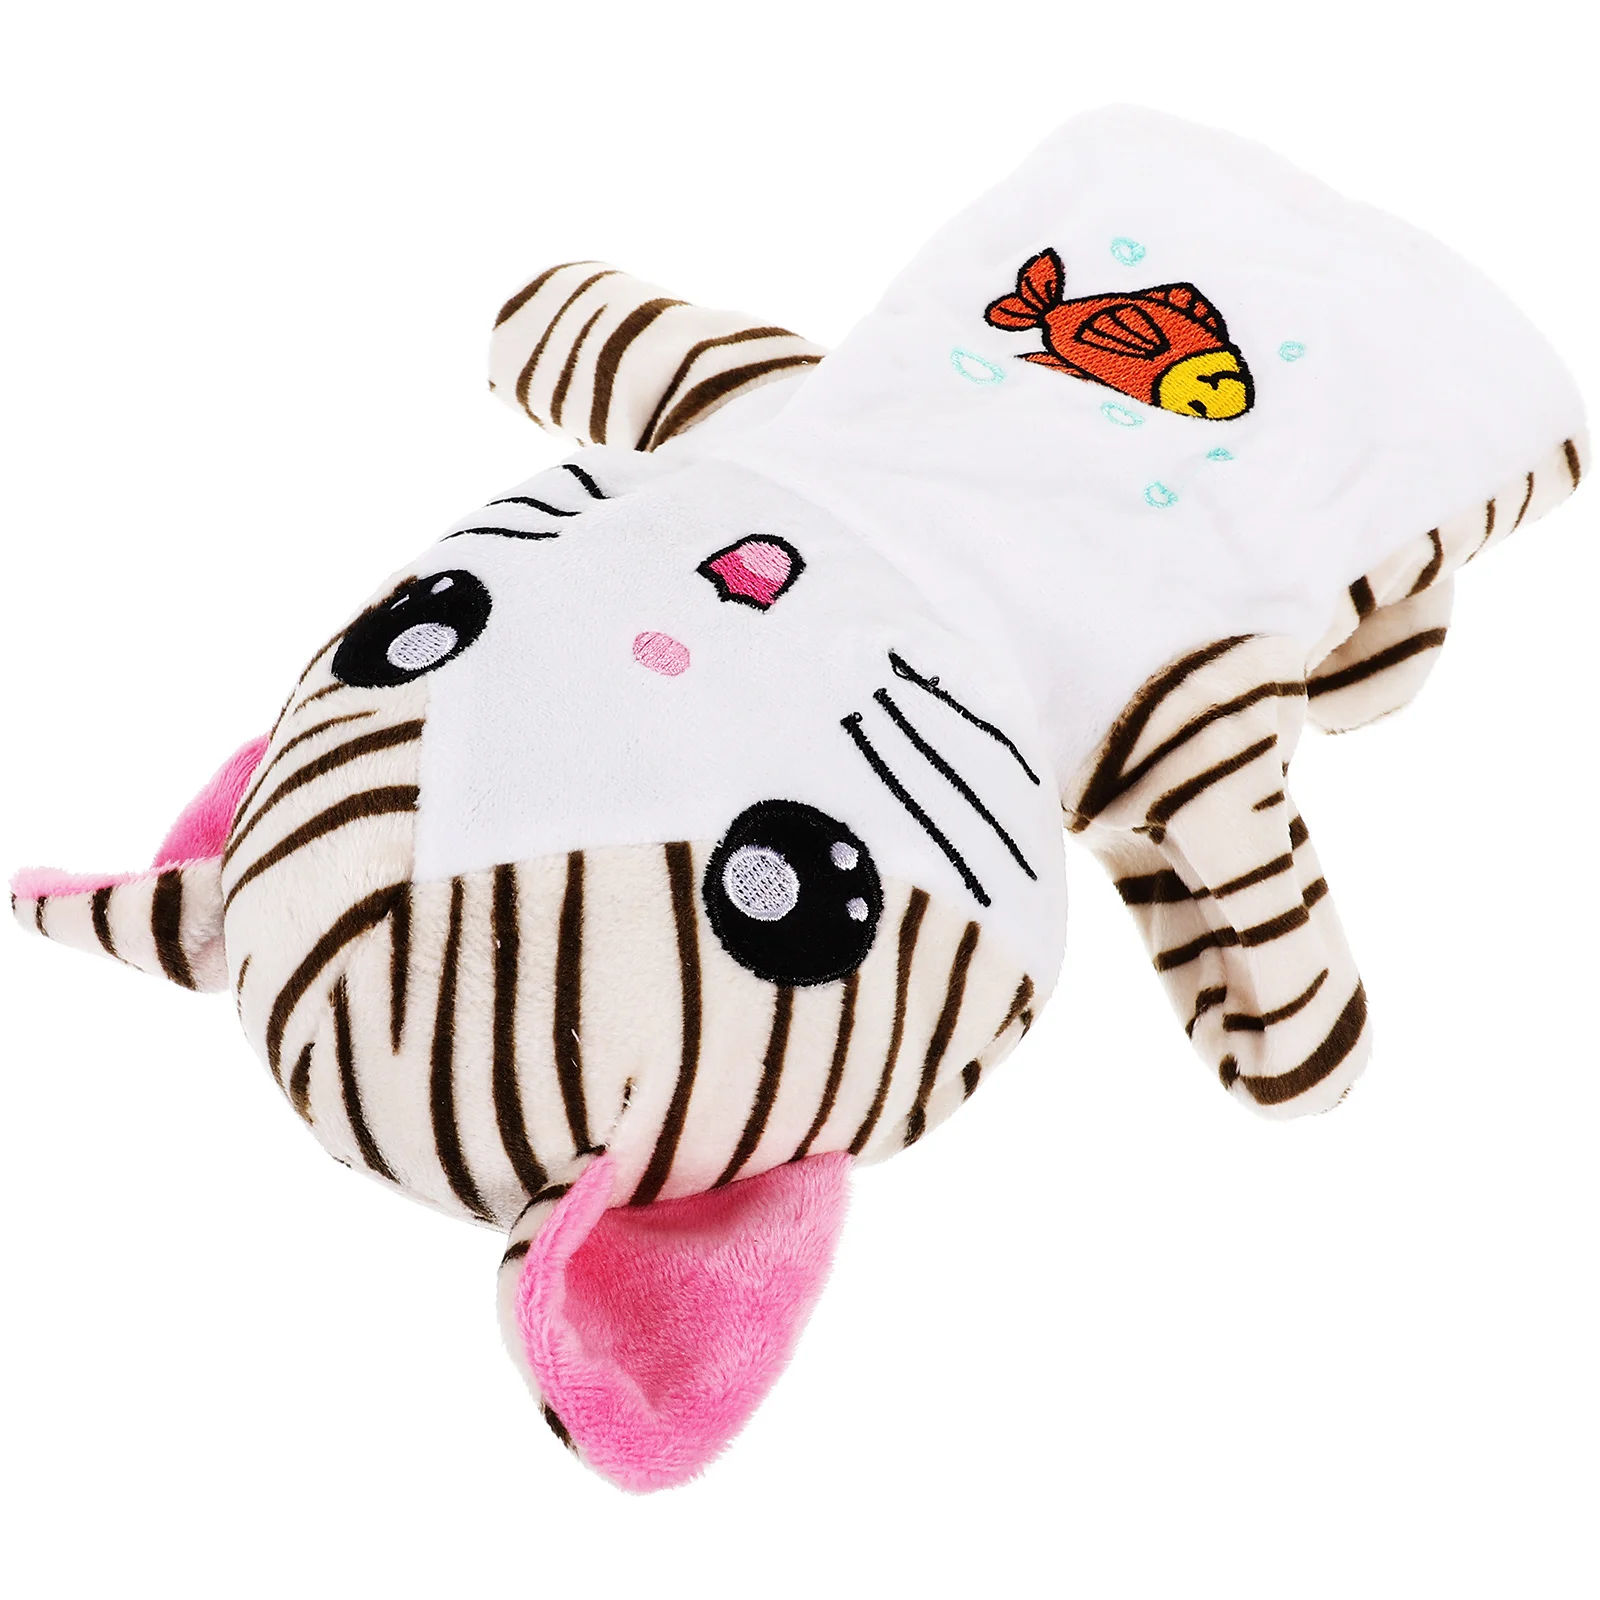 

Hand Puppet Early Education Toy Animal Animals Story Telling Puppets Toddlers Kids Hands Creative